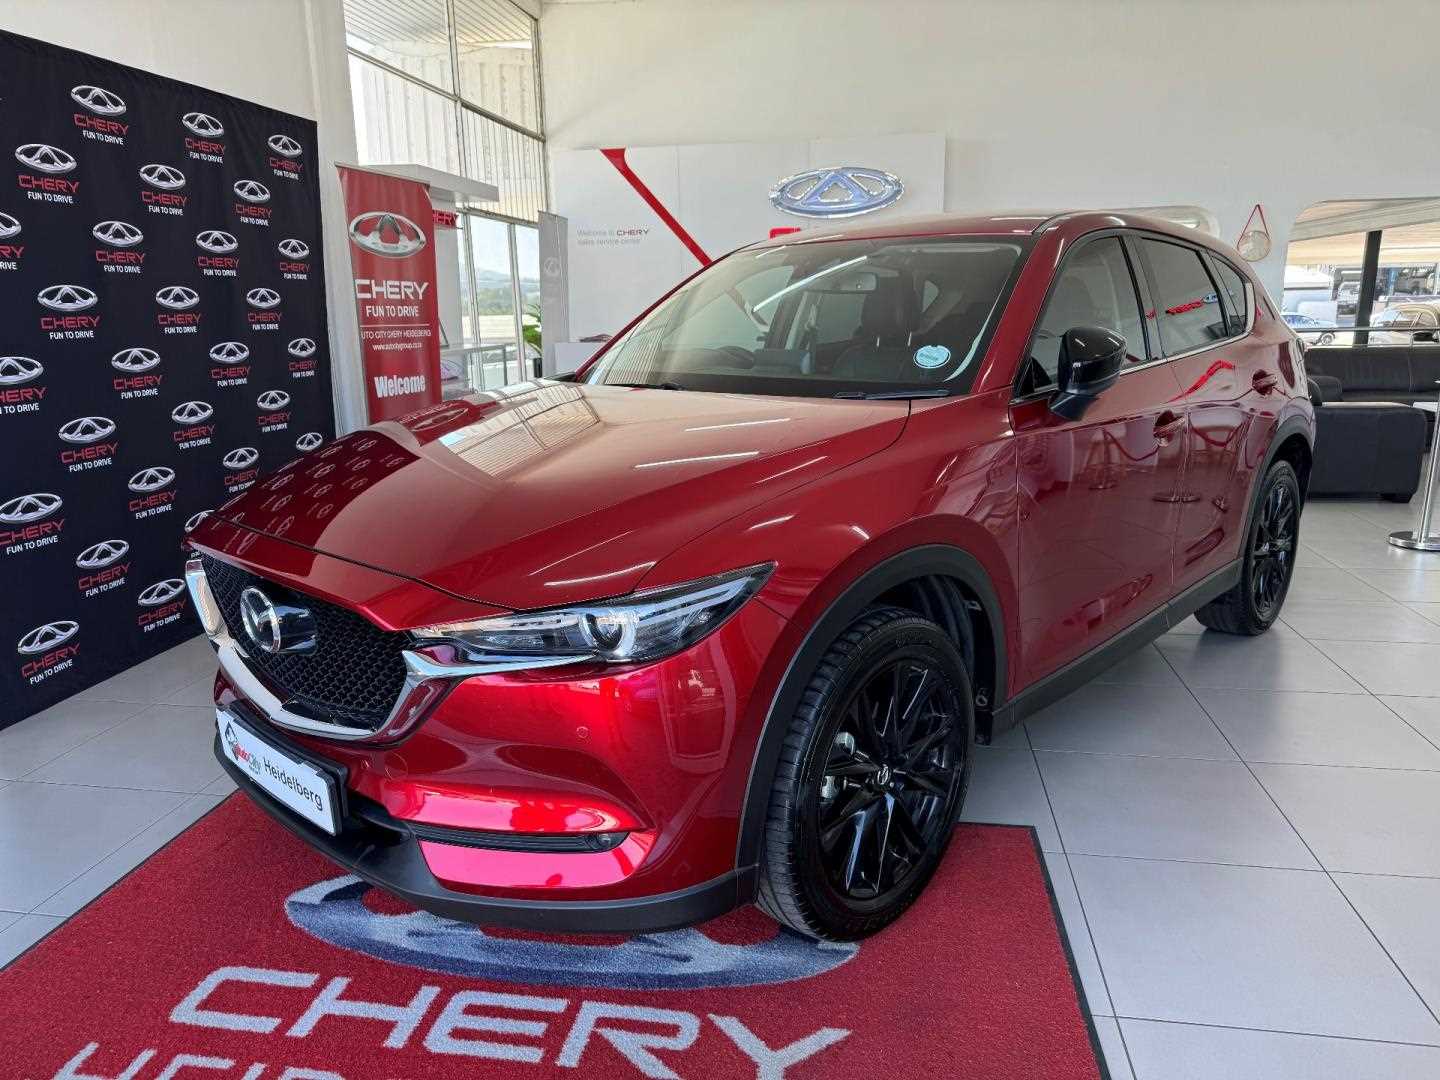 2021 Mazda Cx-5 MY21.1 2.0 Carbon Edition Fwd At for sale - 337608